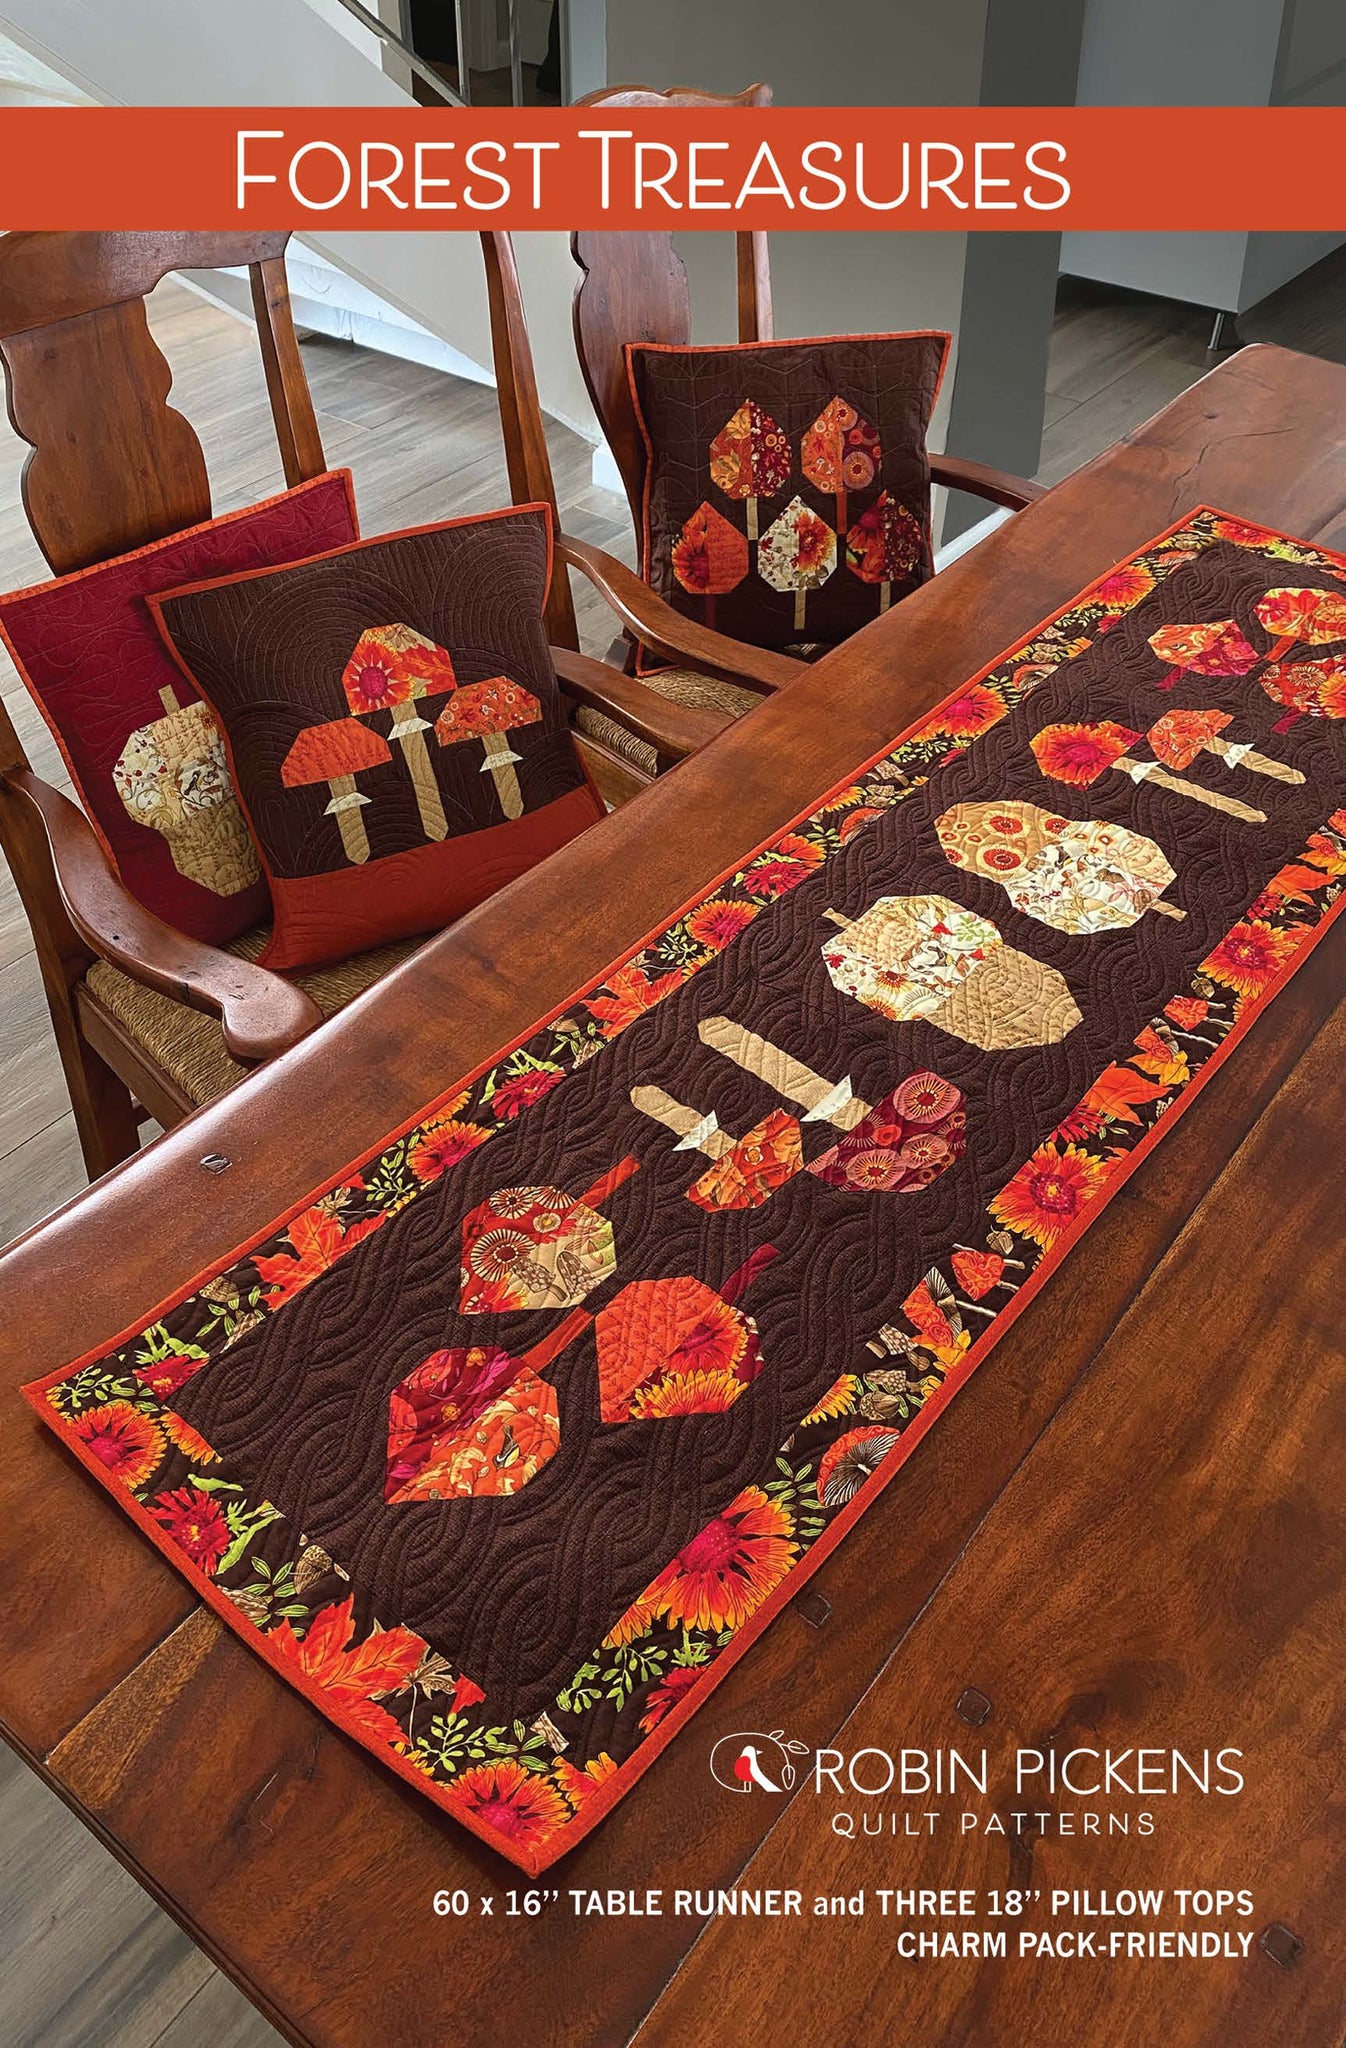 Forest Treasures Table Runner and Pillow Digital PDF pattern